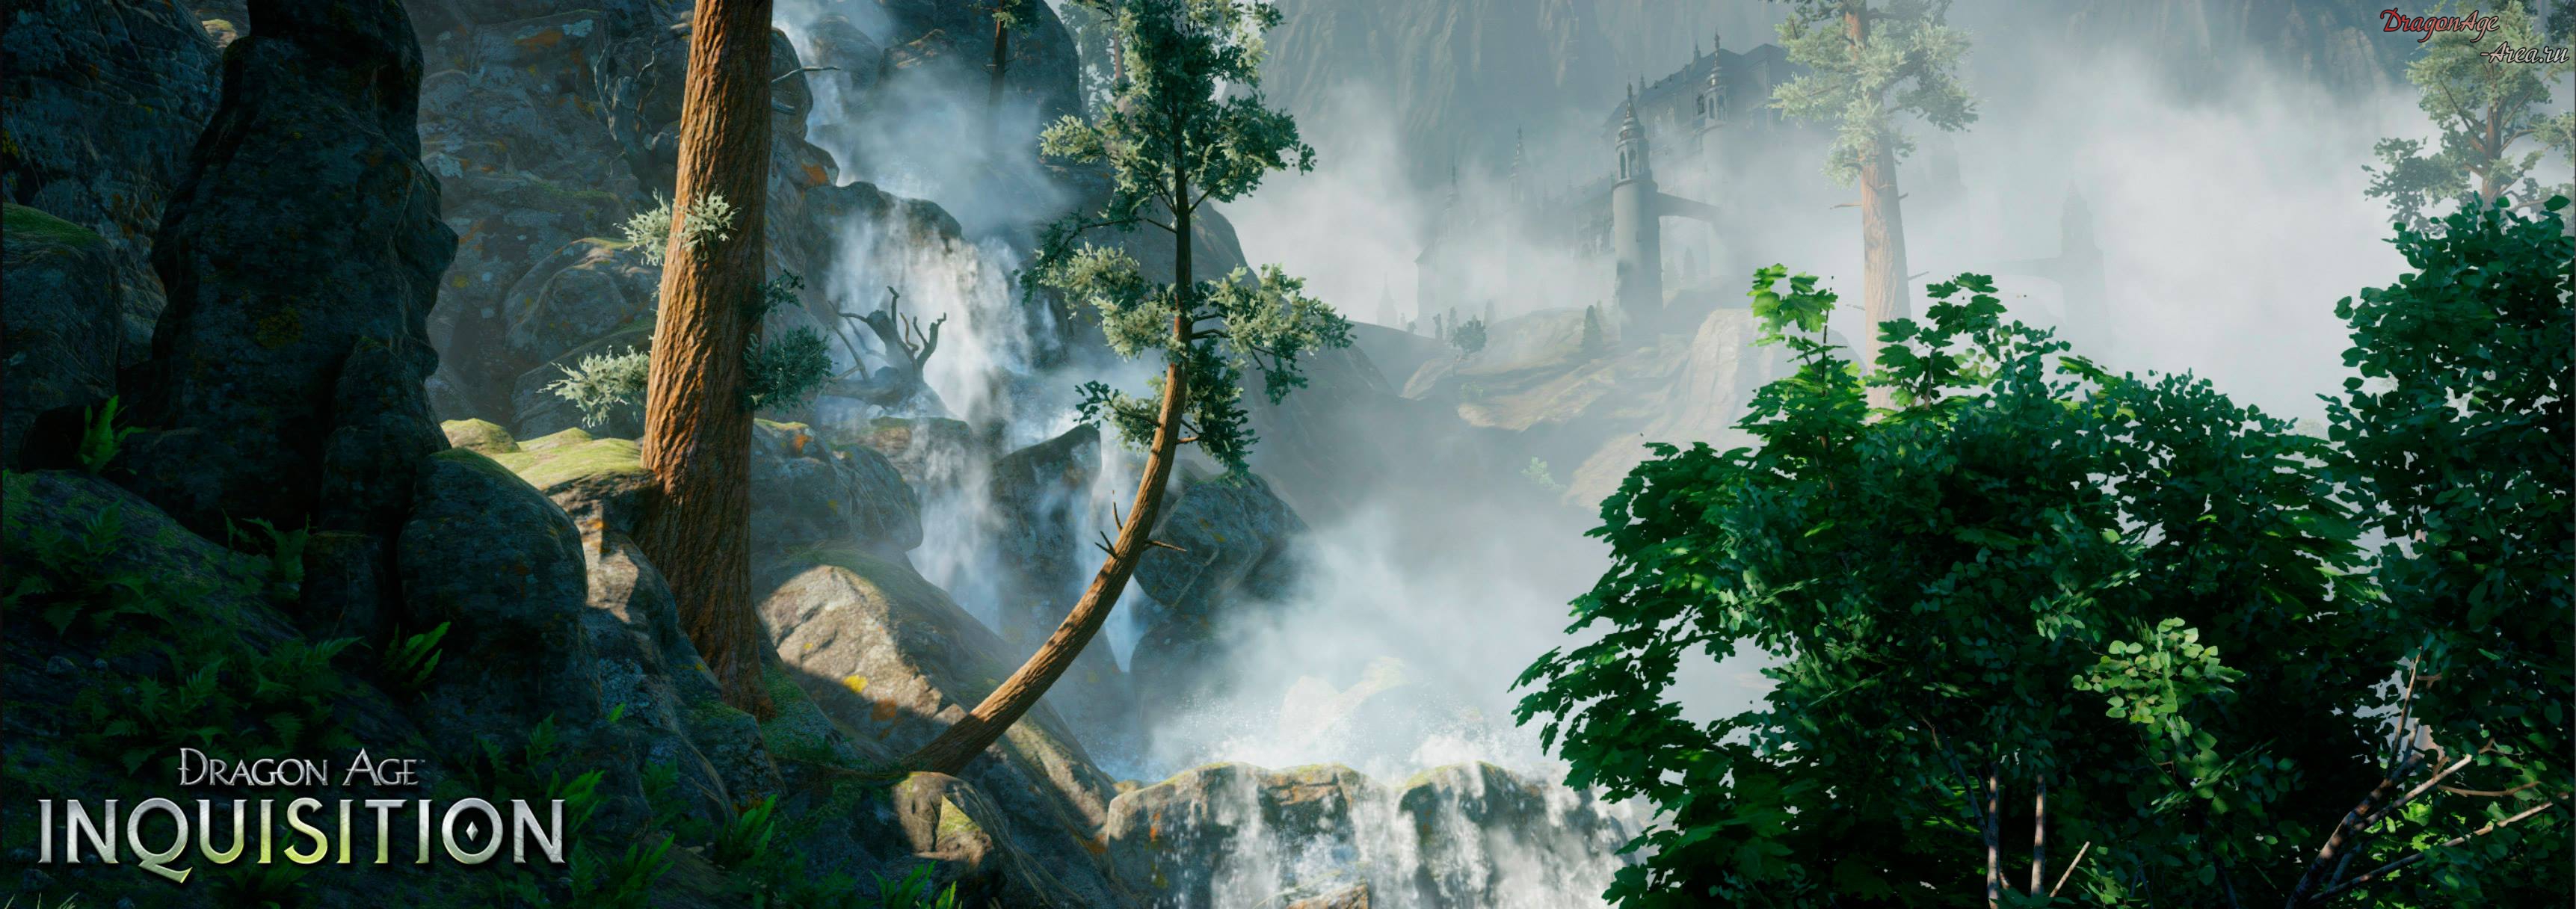 dragon_age_inquistion_forest_screen_02.jpg